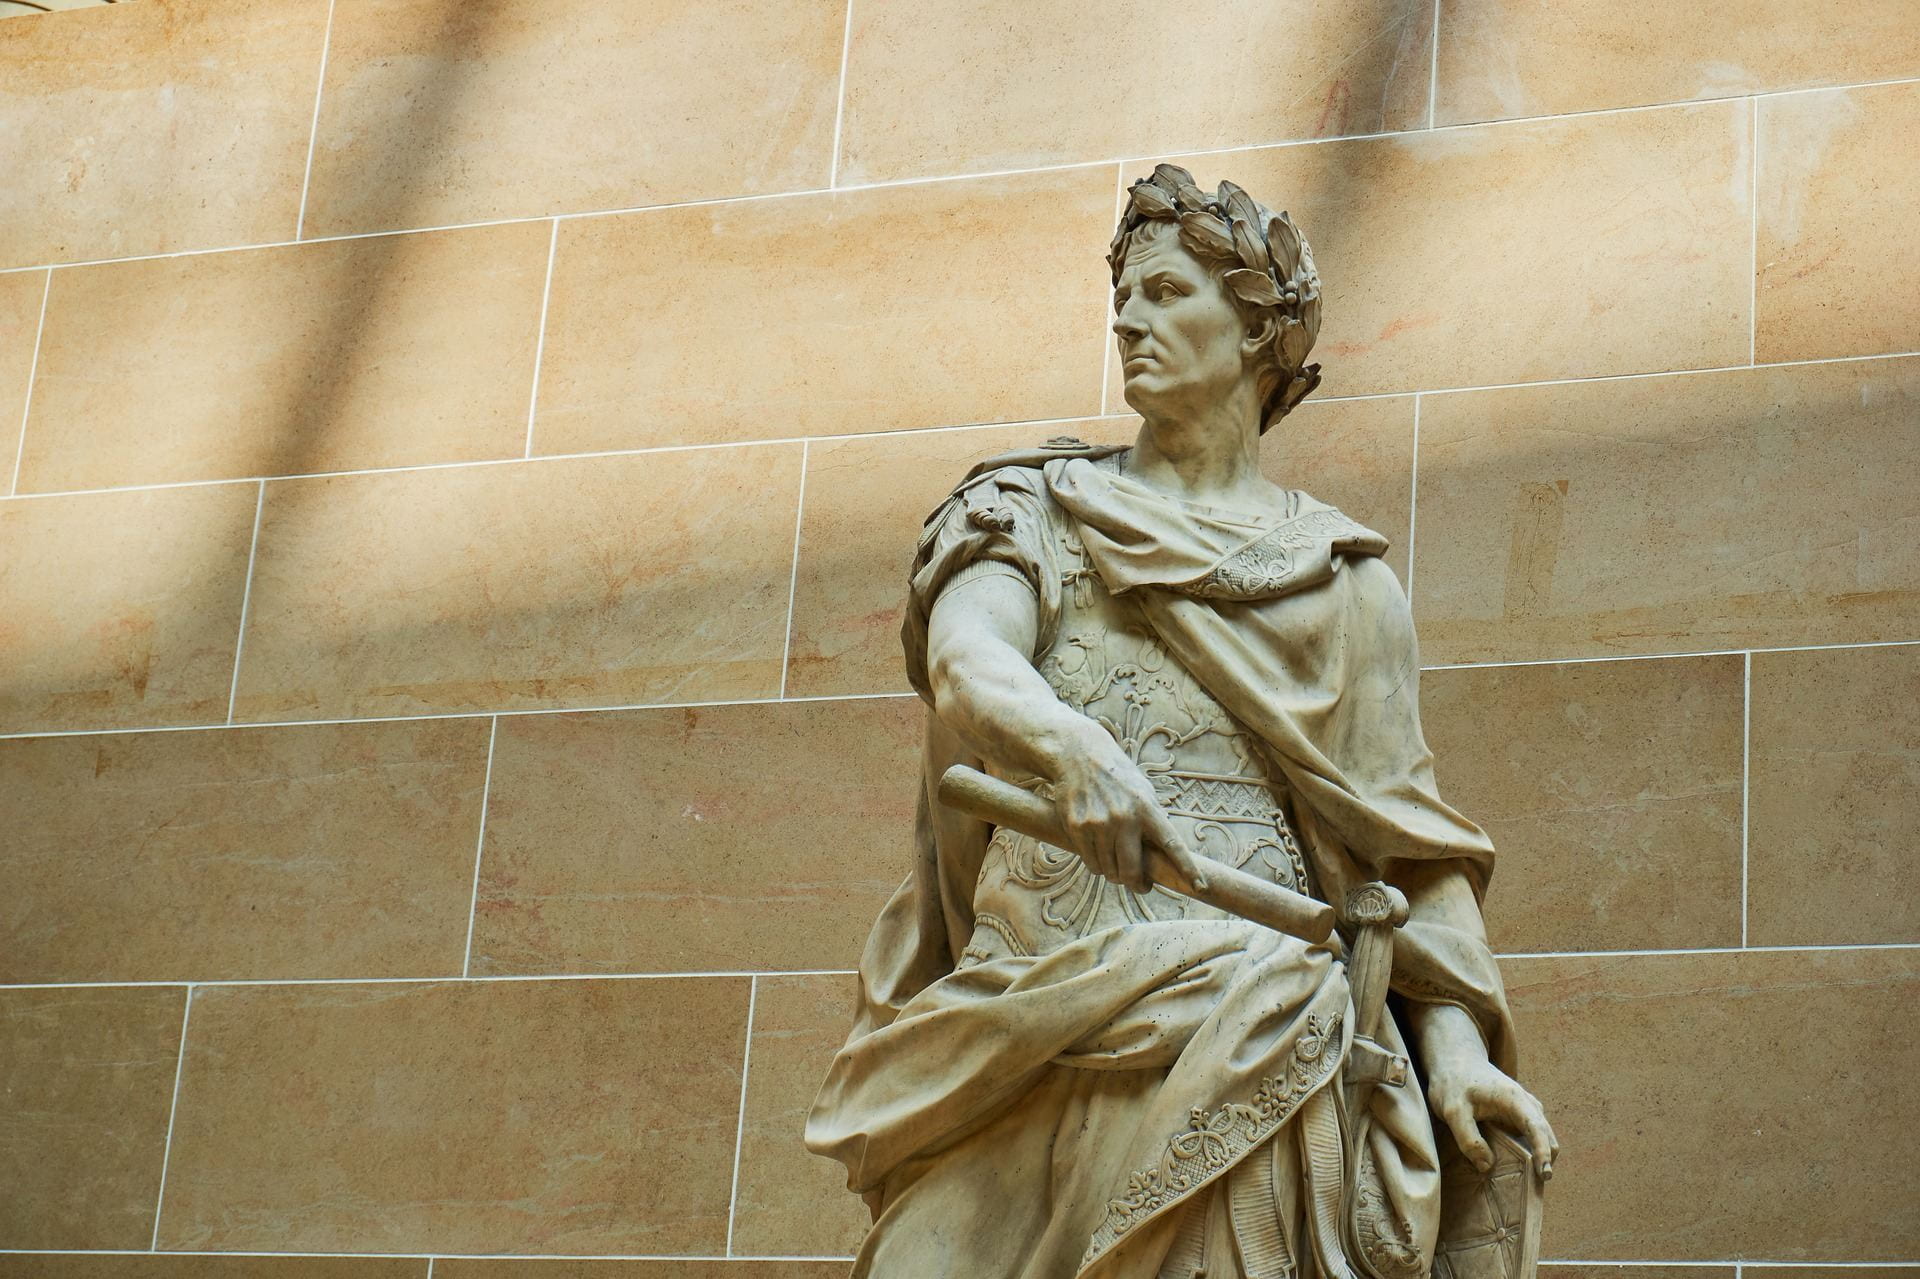 Pictured is the Julius Caesar statue in the Louvre.